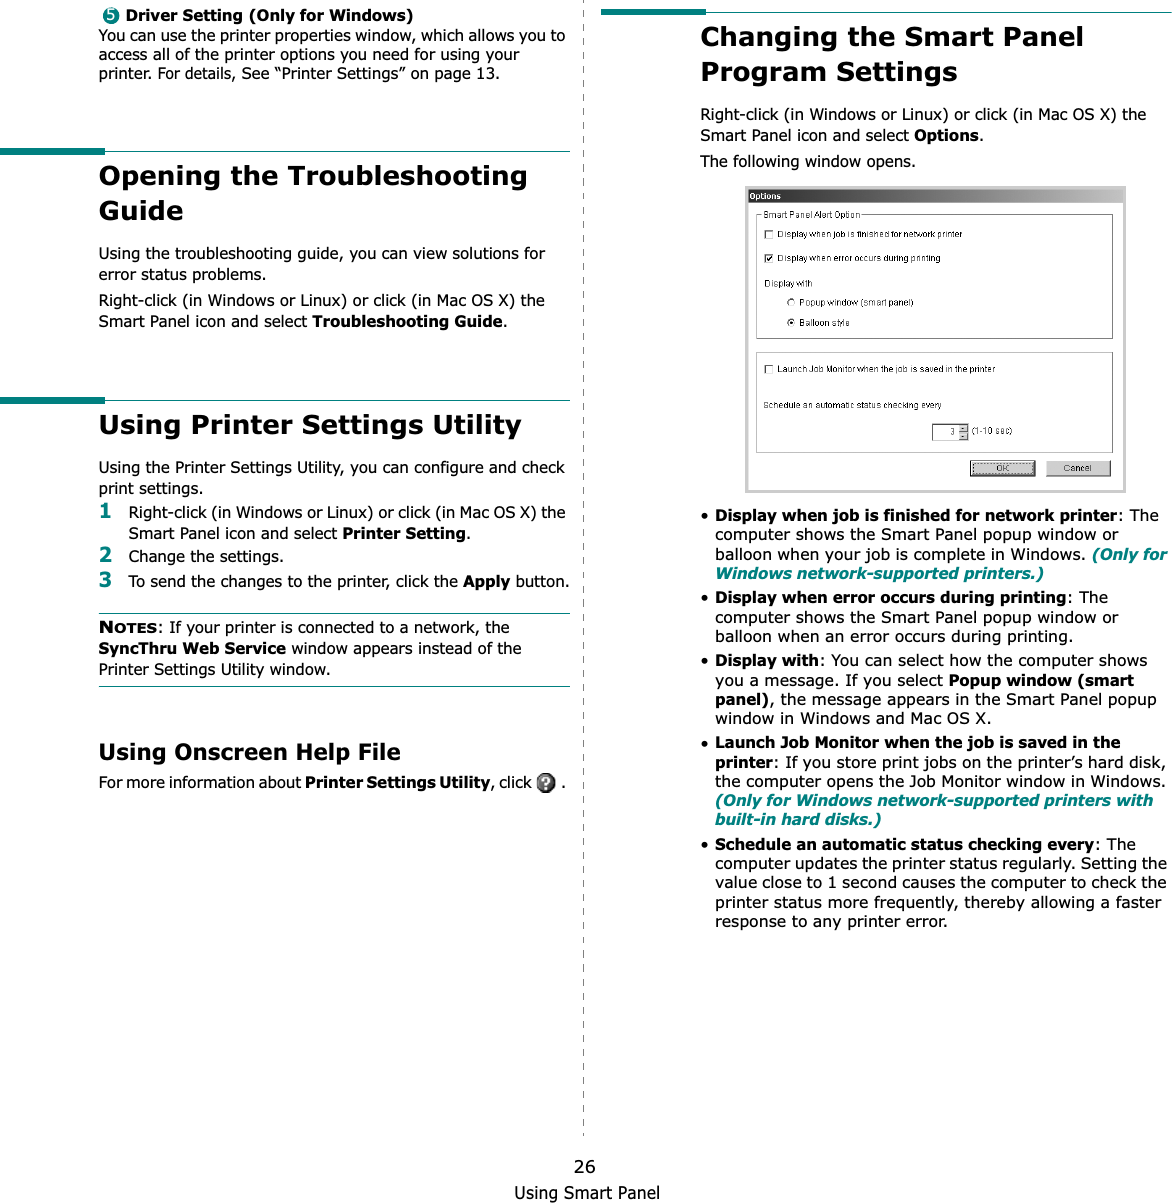 Using Smart Panel26Driver Setting (Only for Windows)You can use the printer properties window, which allows you to access all of the printer options you need for using your printer. For details, See “Printer Settings” on page 13.Opening the Troubleshooting GuideUsing the troubleshooting guide, you can view solutions for error status problems.Right-click (in Windows or Linux) or click (in Mac OS X) the Smart Panel icon and select Troubleshooting Guide.Using Printer Settings UtilityUsing the Printer Settings Utility, you can configure and check print settings. 1Right-click (in Windows or Linux) or click (in Mac OS X) the Smart Panel icon and select Printer Setting.2Change the settings. 3To send the changes to the printer, click the Apply button.NOTES: If your printer is connected to a network, the SyncThru Web Service window appears instead of the Printer Settings Utility window.Using Onscreen Help FileFor more information about Printer Settings Utility, click   . 5Changing the Smart Panel Program SettingsRight-click (in Windows or Linux) or click (in Mac OS X) the Smart Panel icon and select Options.The following window opens.•Display when job is finished for network printer: The computer shows the Smart Panel popup window or balloon when your job is complete in Windows. (Only for Windows network-supported printers.)•Display when error occurs during printing: The computer shows the Smart Panel popup window or balloon when an error occurs during printing.•Display with: You can select how the computer shows you a message. If you select Popup window (smart panel), the message appears in the Smart Panel popup window in Windows and Mac OS X.•Launch Job Monitor when the job is saved in the printer: If you store print jobs on the printer’s hard disk, the computer opens the Job Monitor window in Windows. (Only for Windows network-supported printers with built-in hard disks.)•Schedule an automatic status checking every: The computer updates the printer status regularly. Setting the value close to 1 second causes the computer to check the printer status more frequently, thereby allowing a faster response to any printer error.